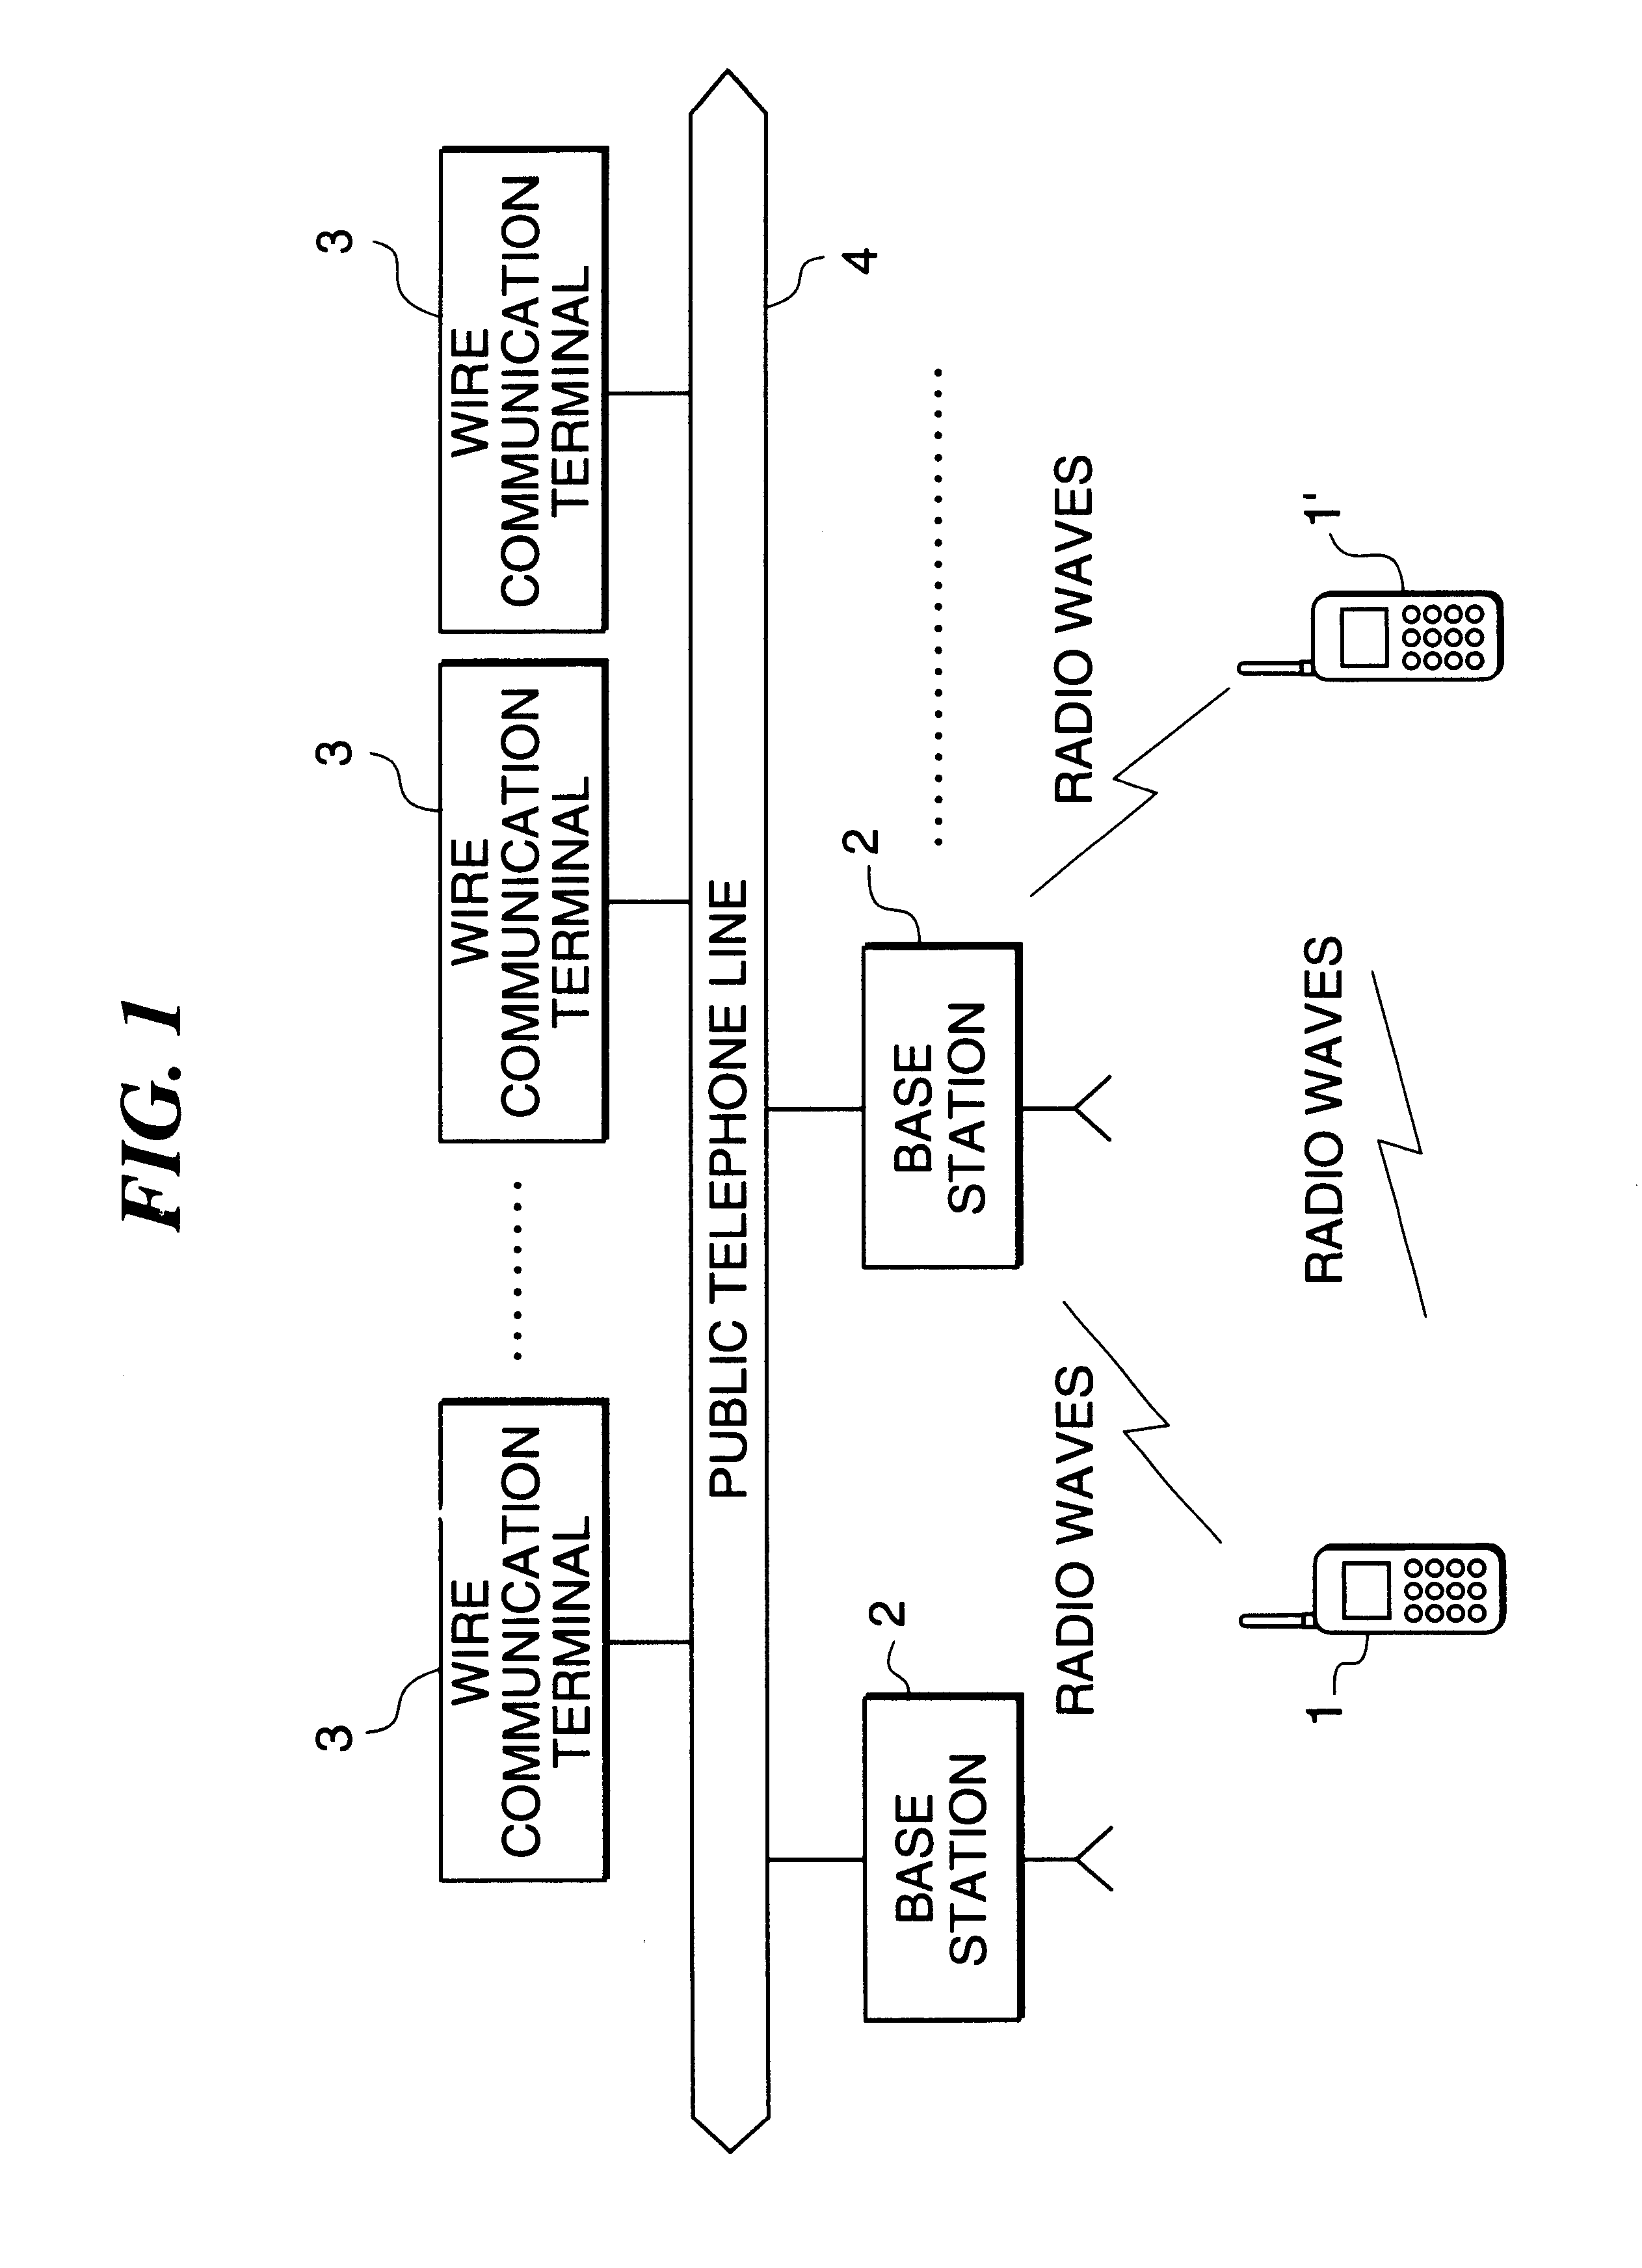 Communication apparatus, control method therefor and storage medium storing program for executing the method